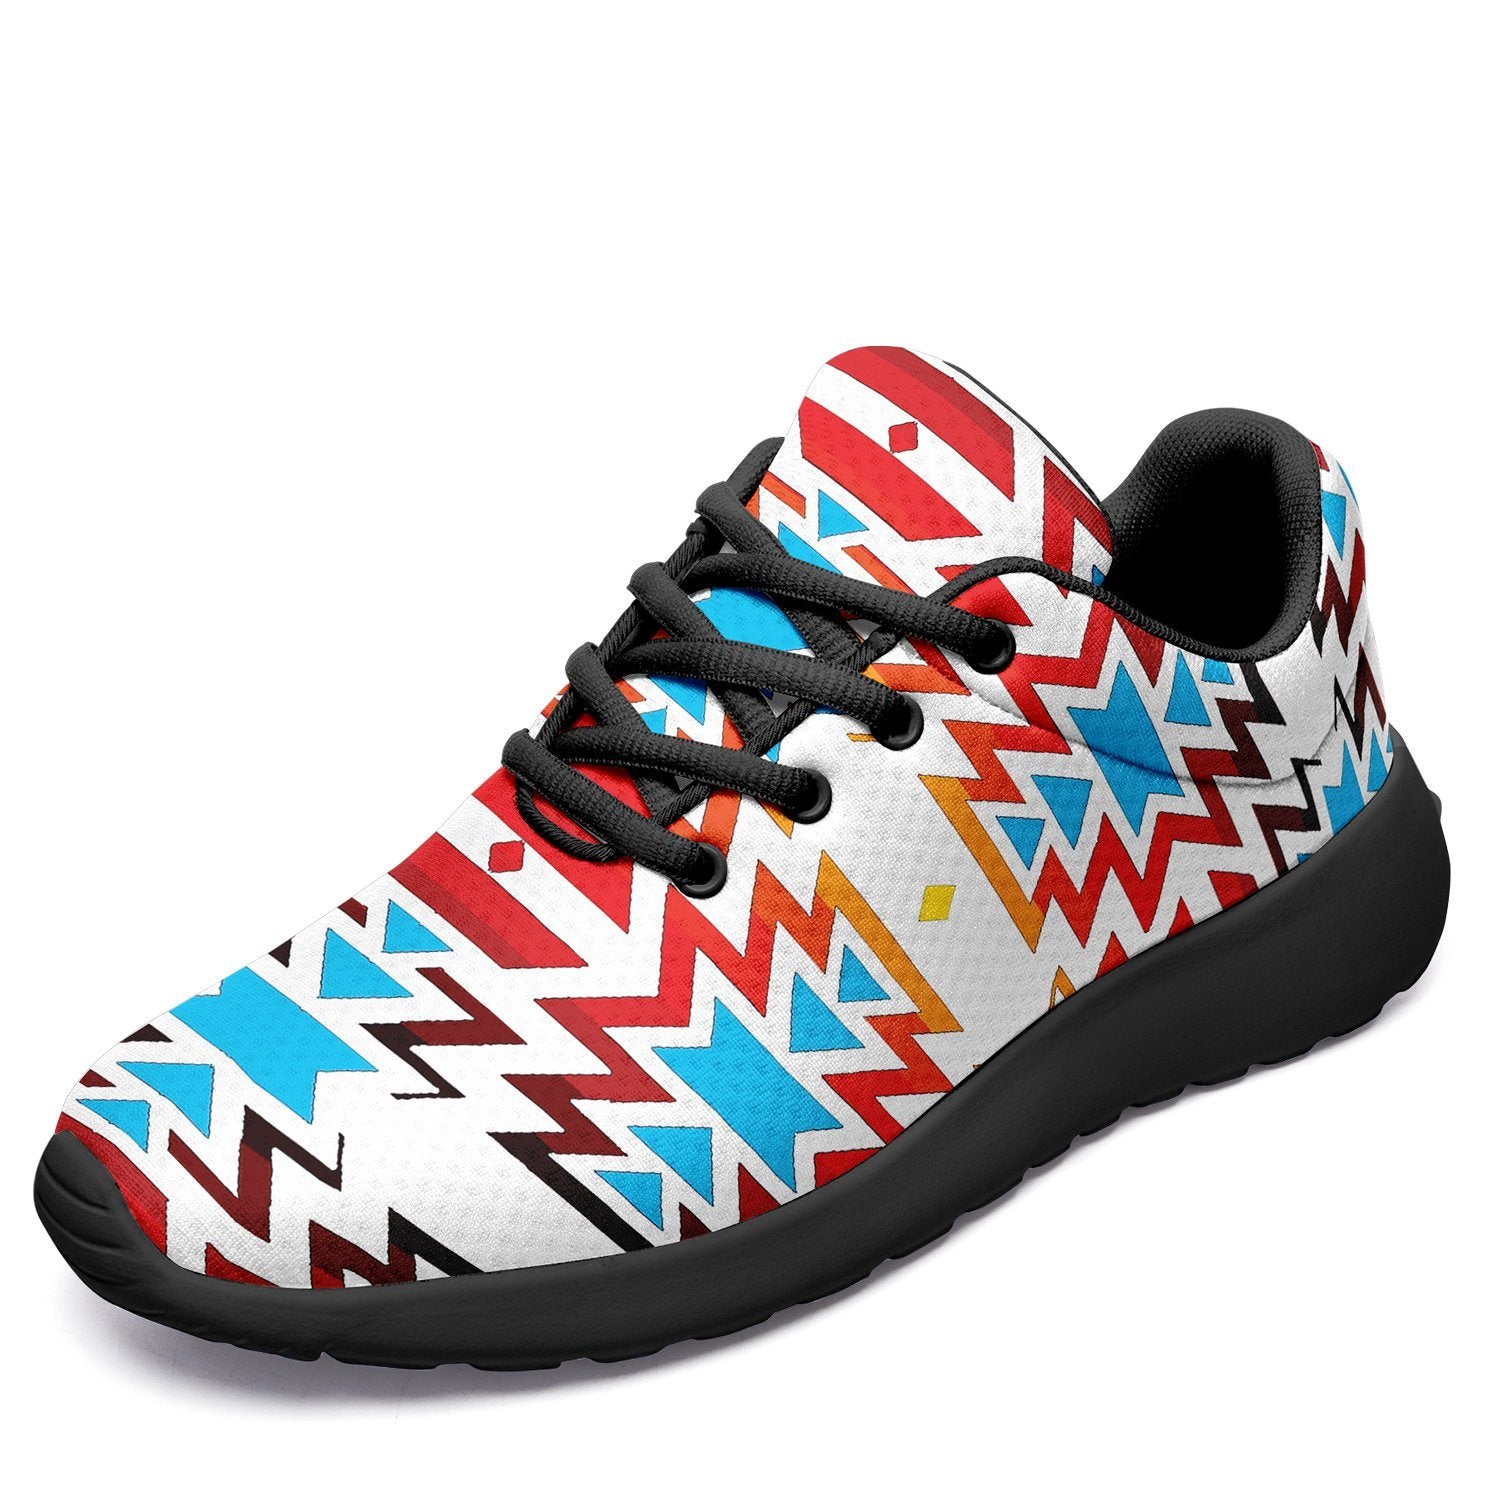 Fire Colors and Sky Ikkaayi Sport Sneakers 49 Dzine US Women 4.5 / US Youth 3.5 / EUR 35 Black Sole 